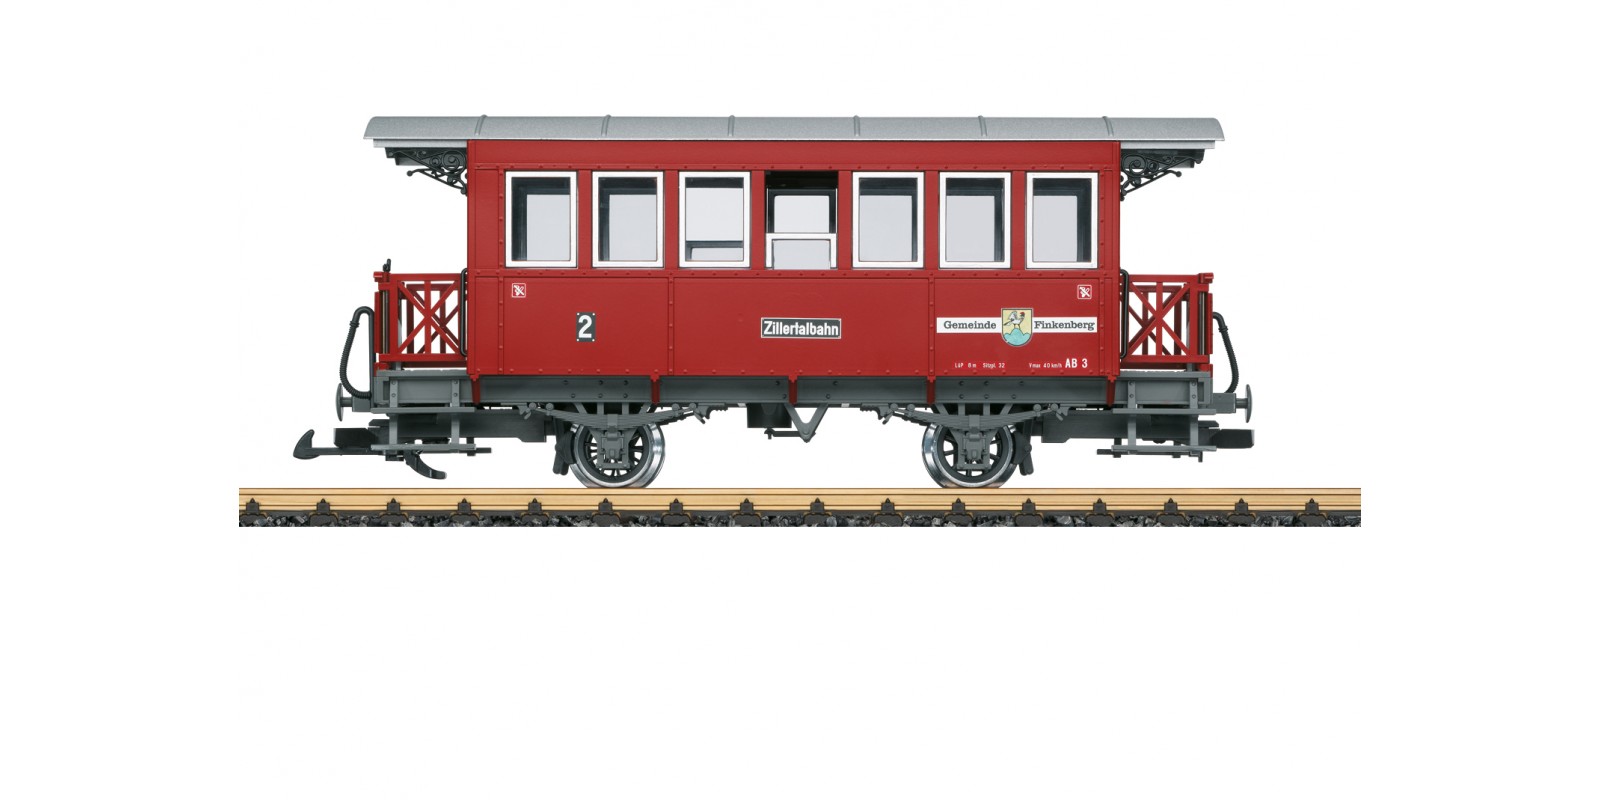 L33210 Ziller Valley Railroad Type AB 3